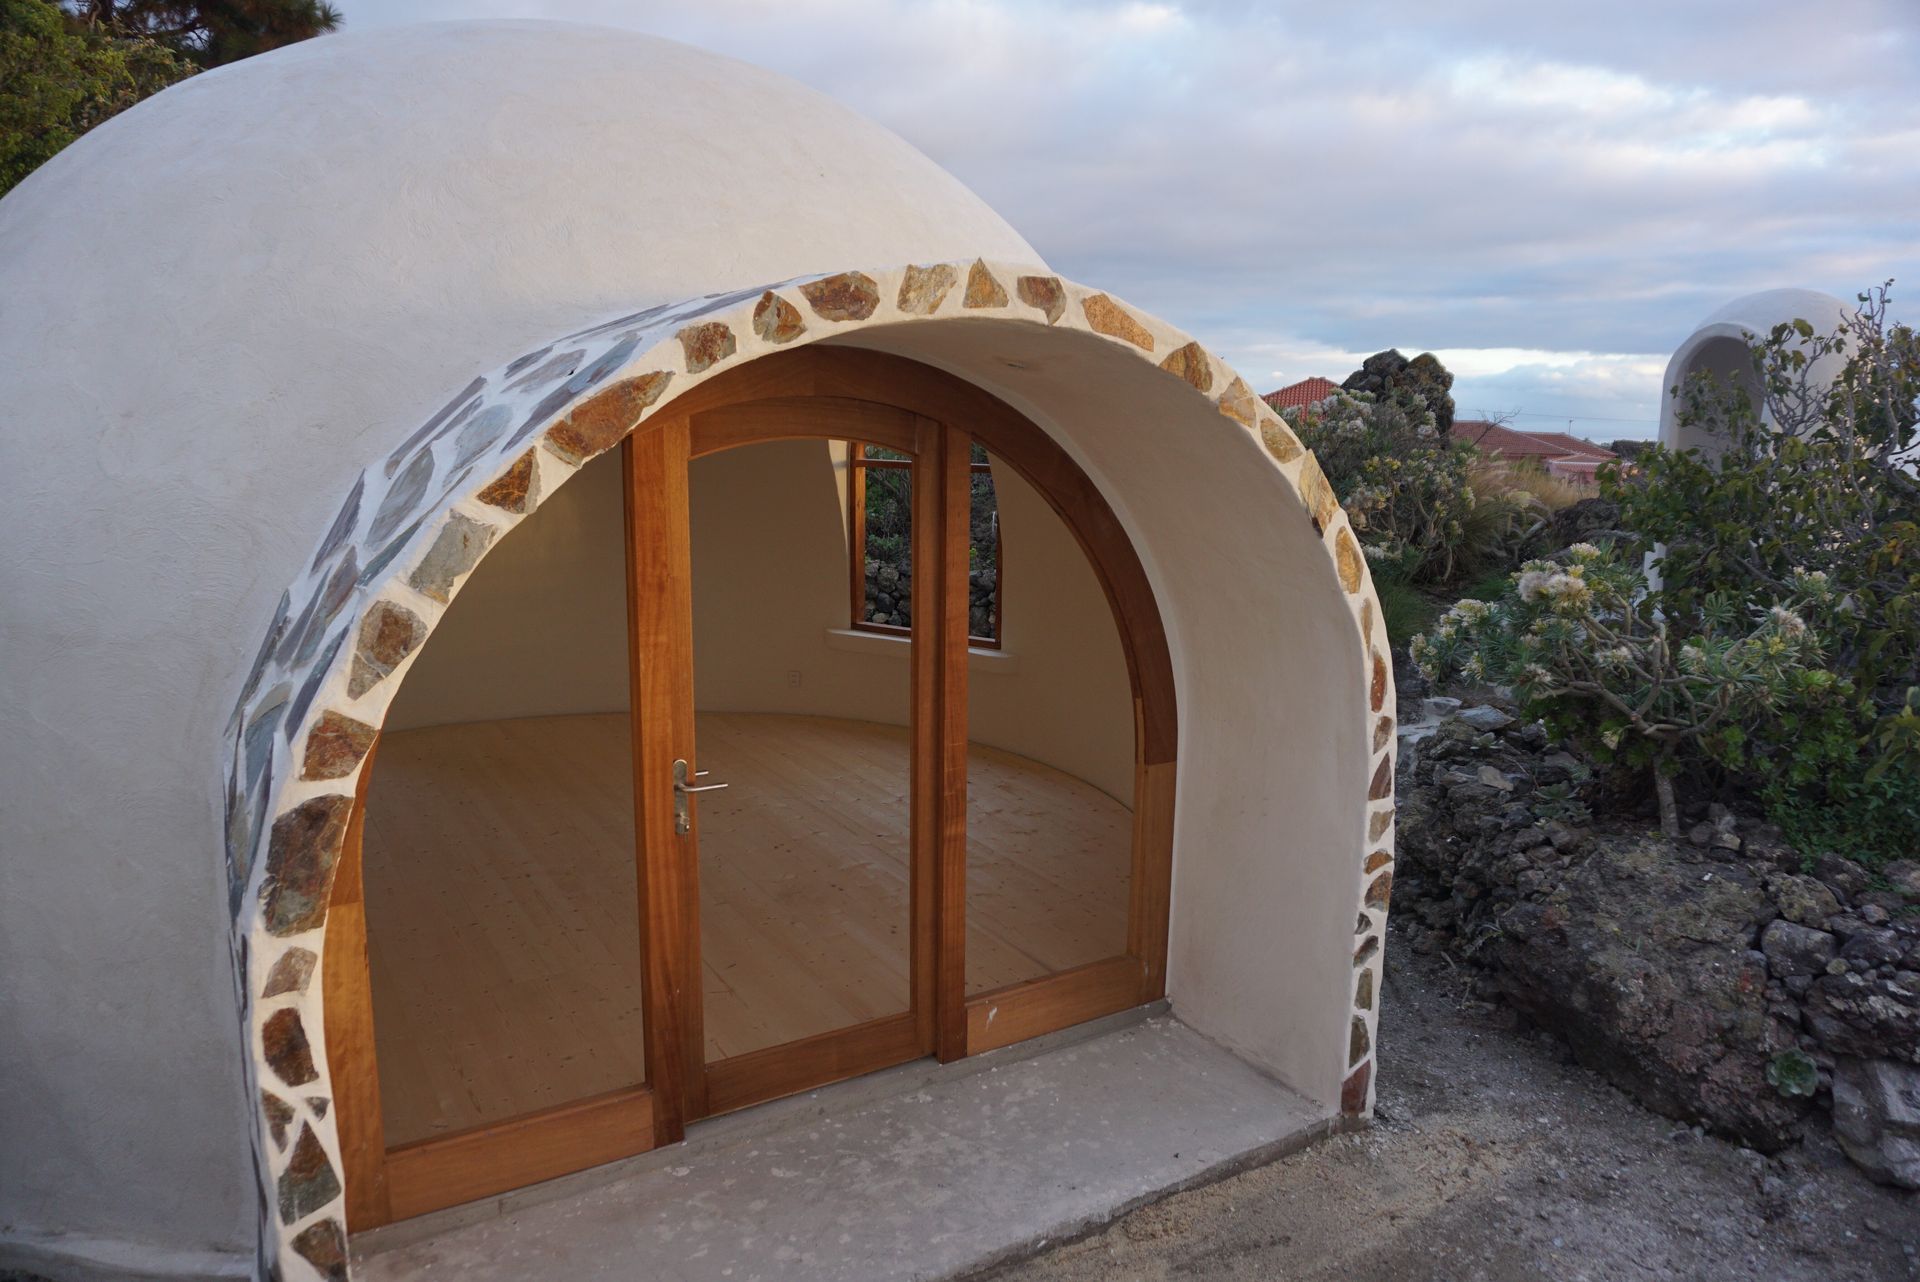 Aircrete dome seen from the front with off-white plaster exterior and arched glass front door.